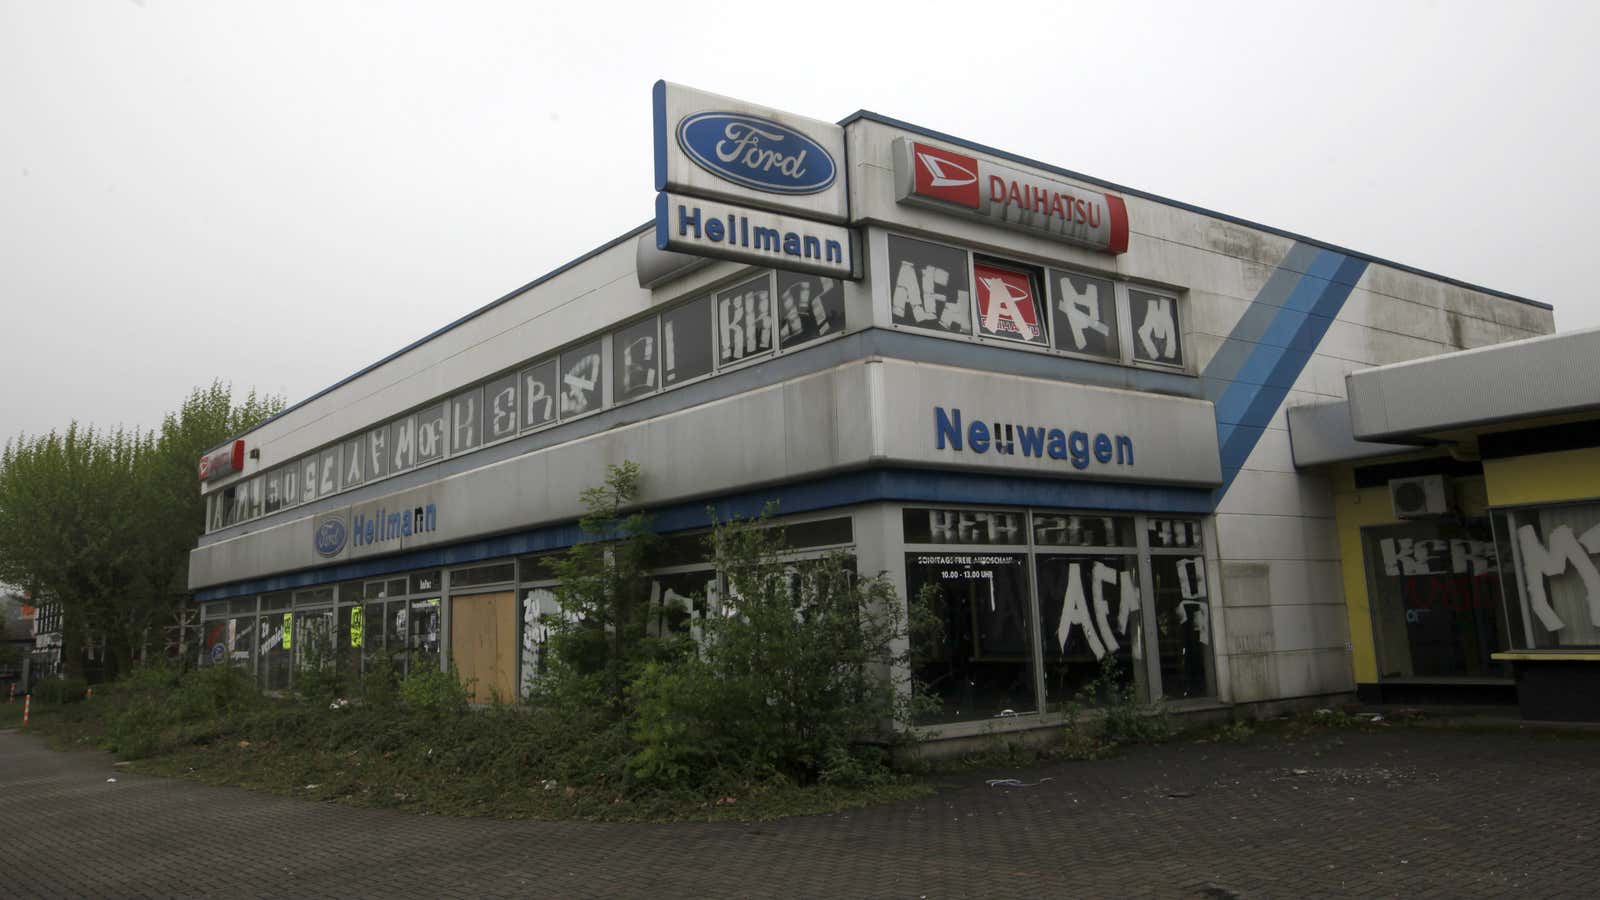 Auto dealers in Europe have seen better days.